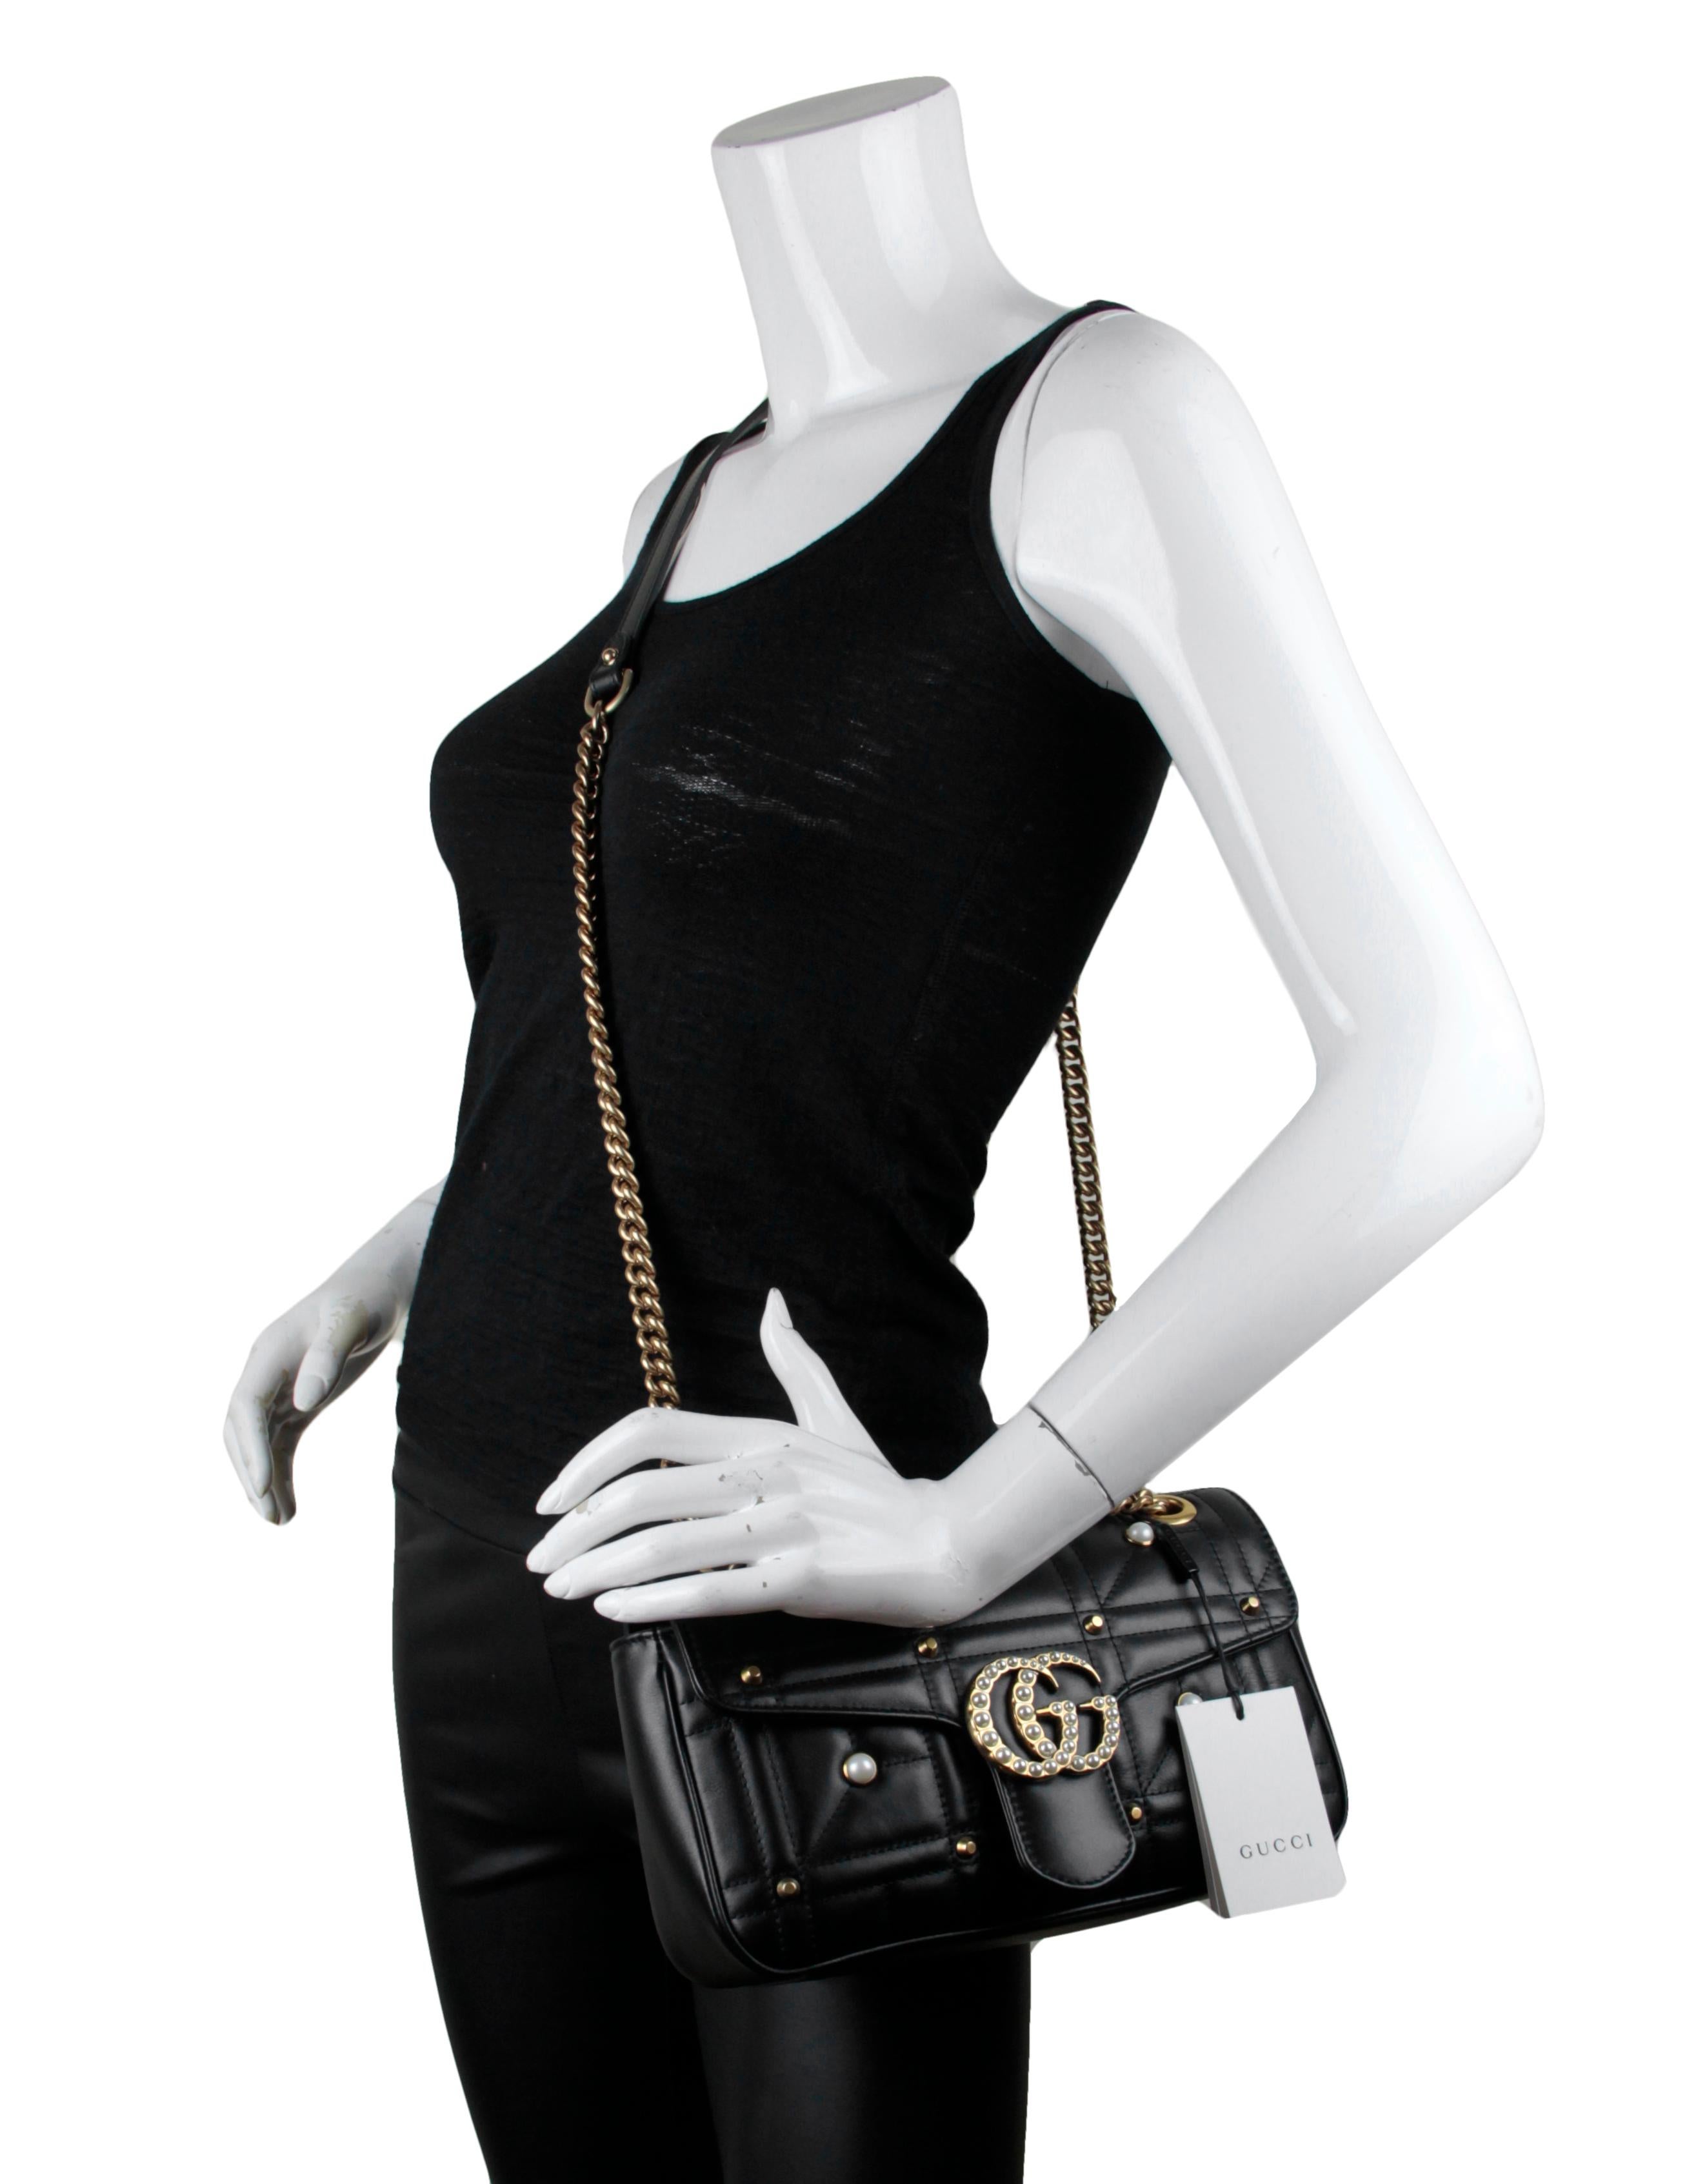 Gucci NWT Black Small GG Marmont Matelassé Pearl Studded Shoulder Bag. Features a sliding chain strap that can be worn as a crossbody bag with a 22” drop or as a shoulder bag with a 12” drop.

Made In: Italy
Year of Production: 2021
Color: Black